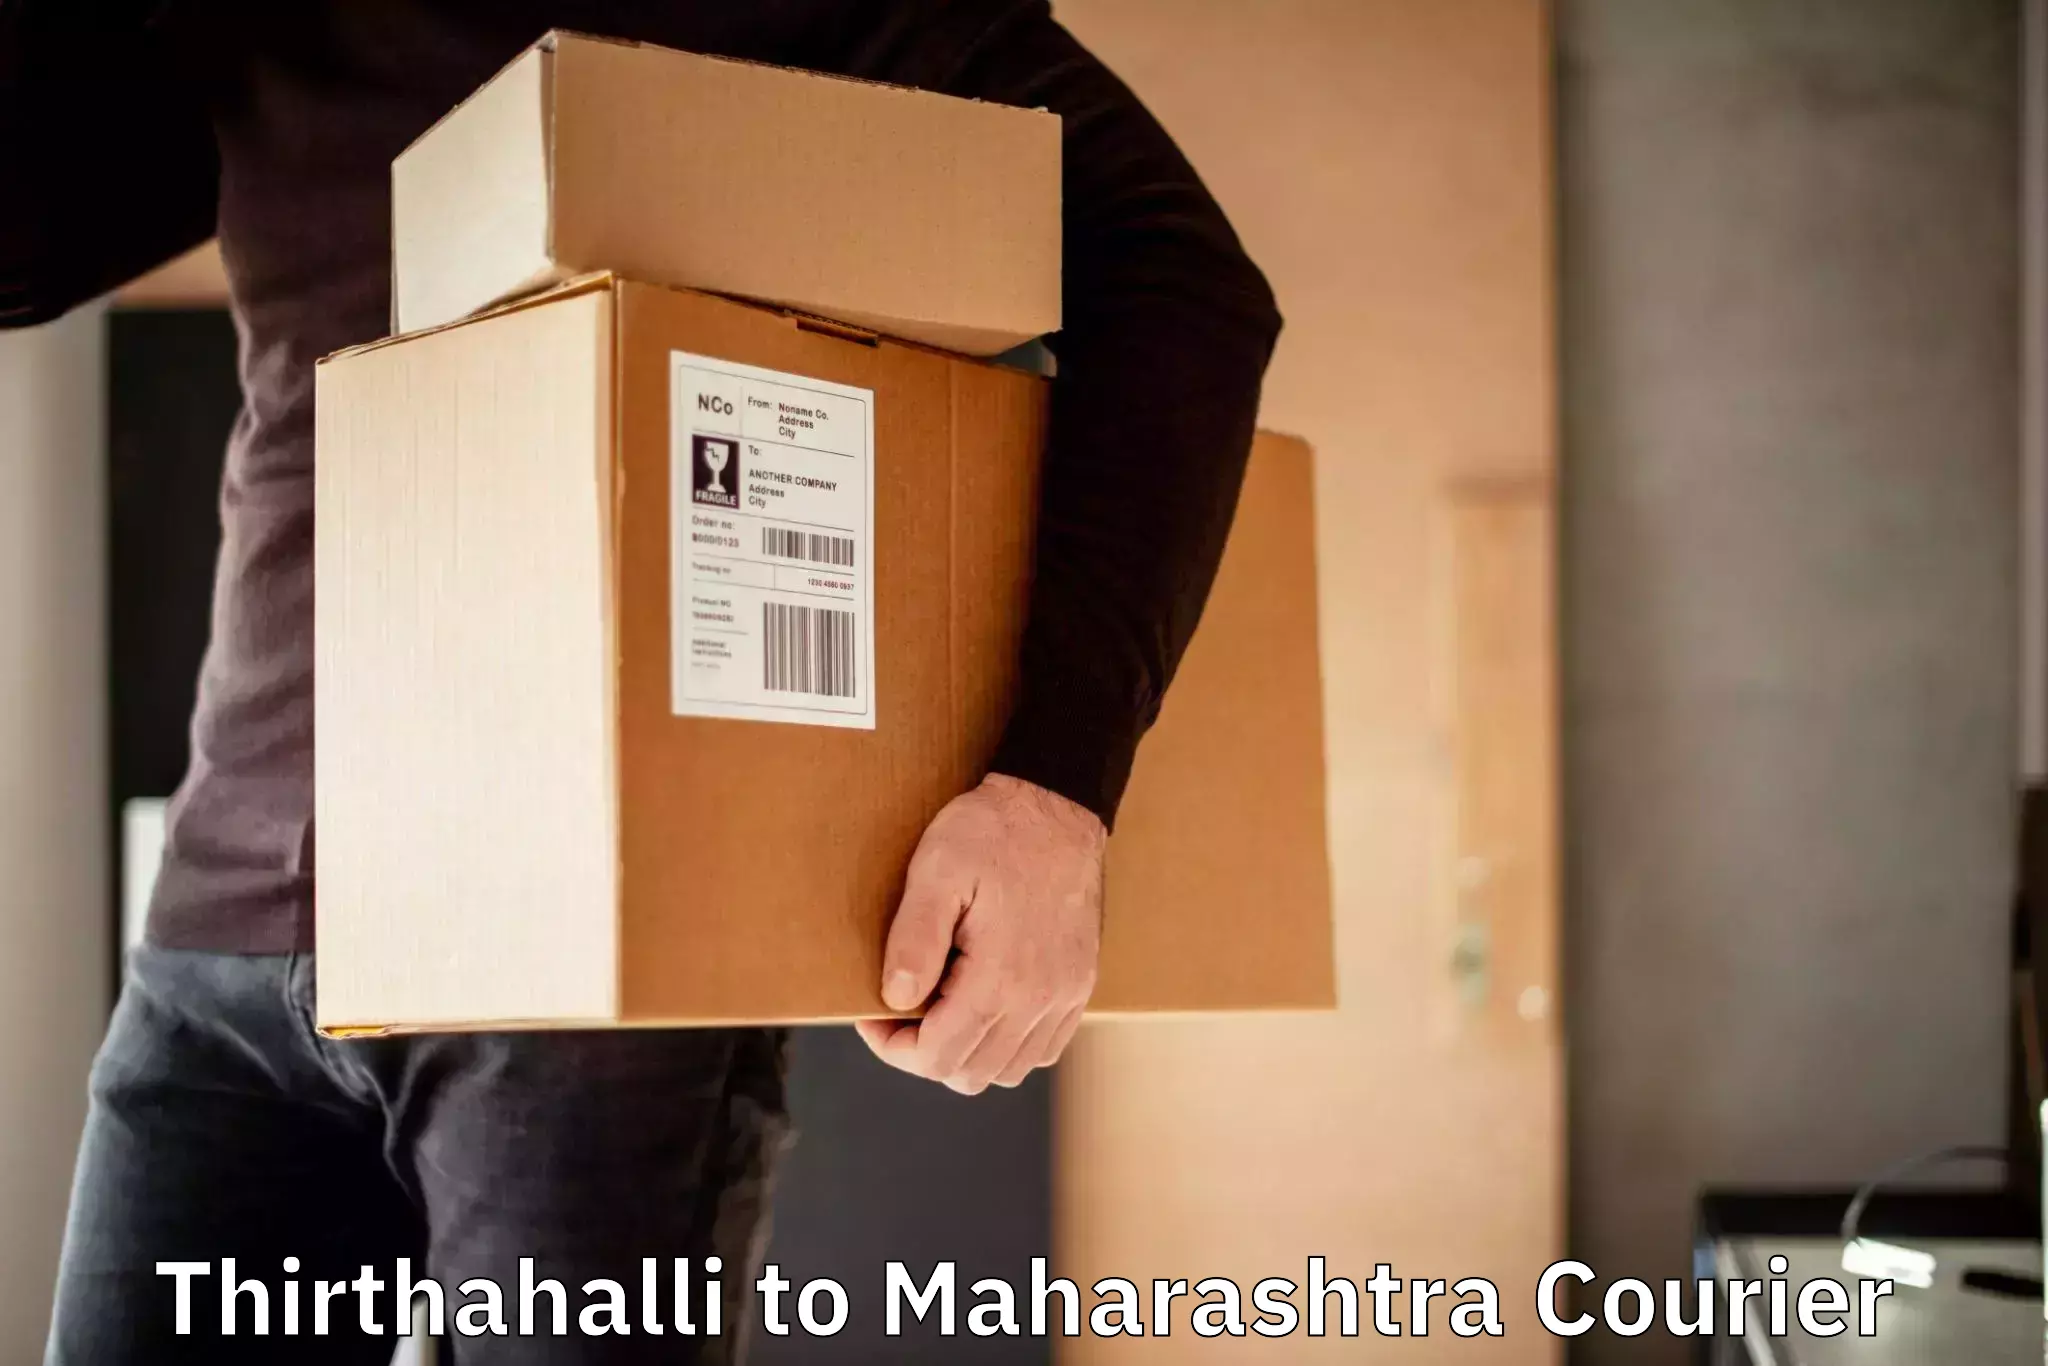 Reliable courier service in Thirthahalli to Nagpur